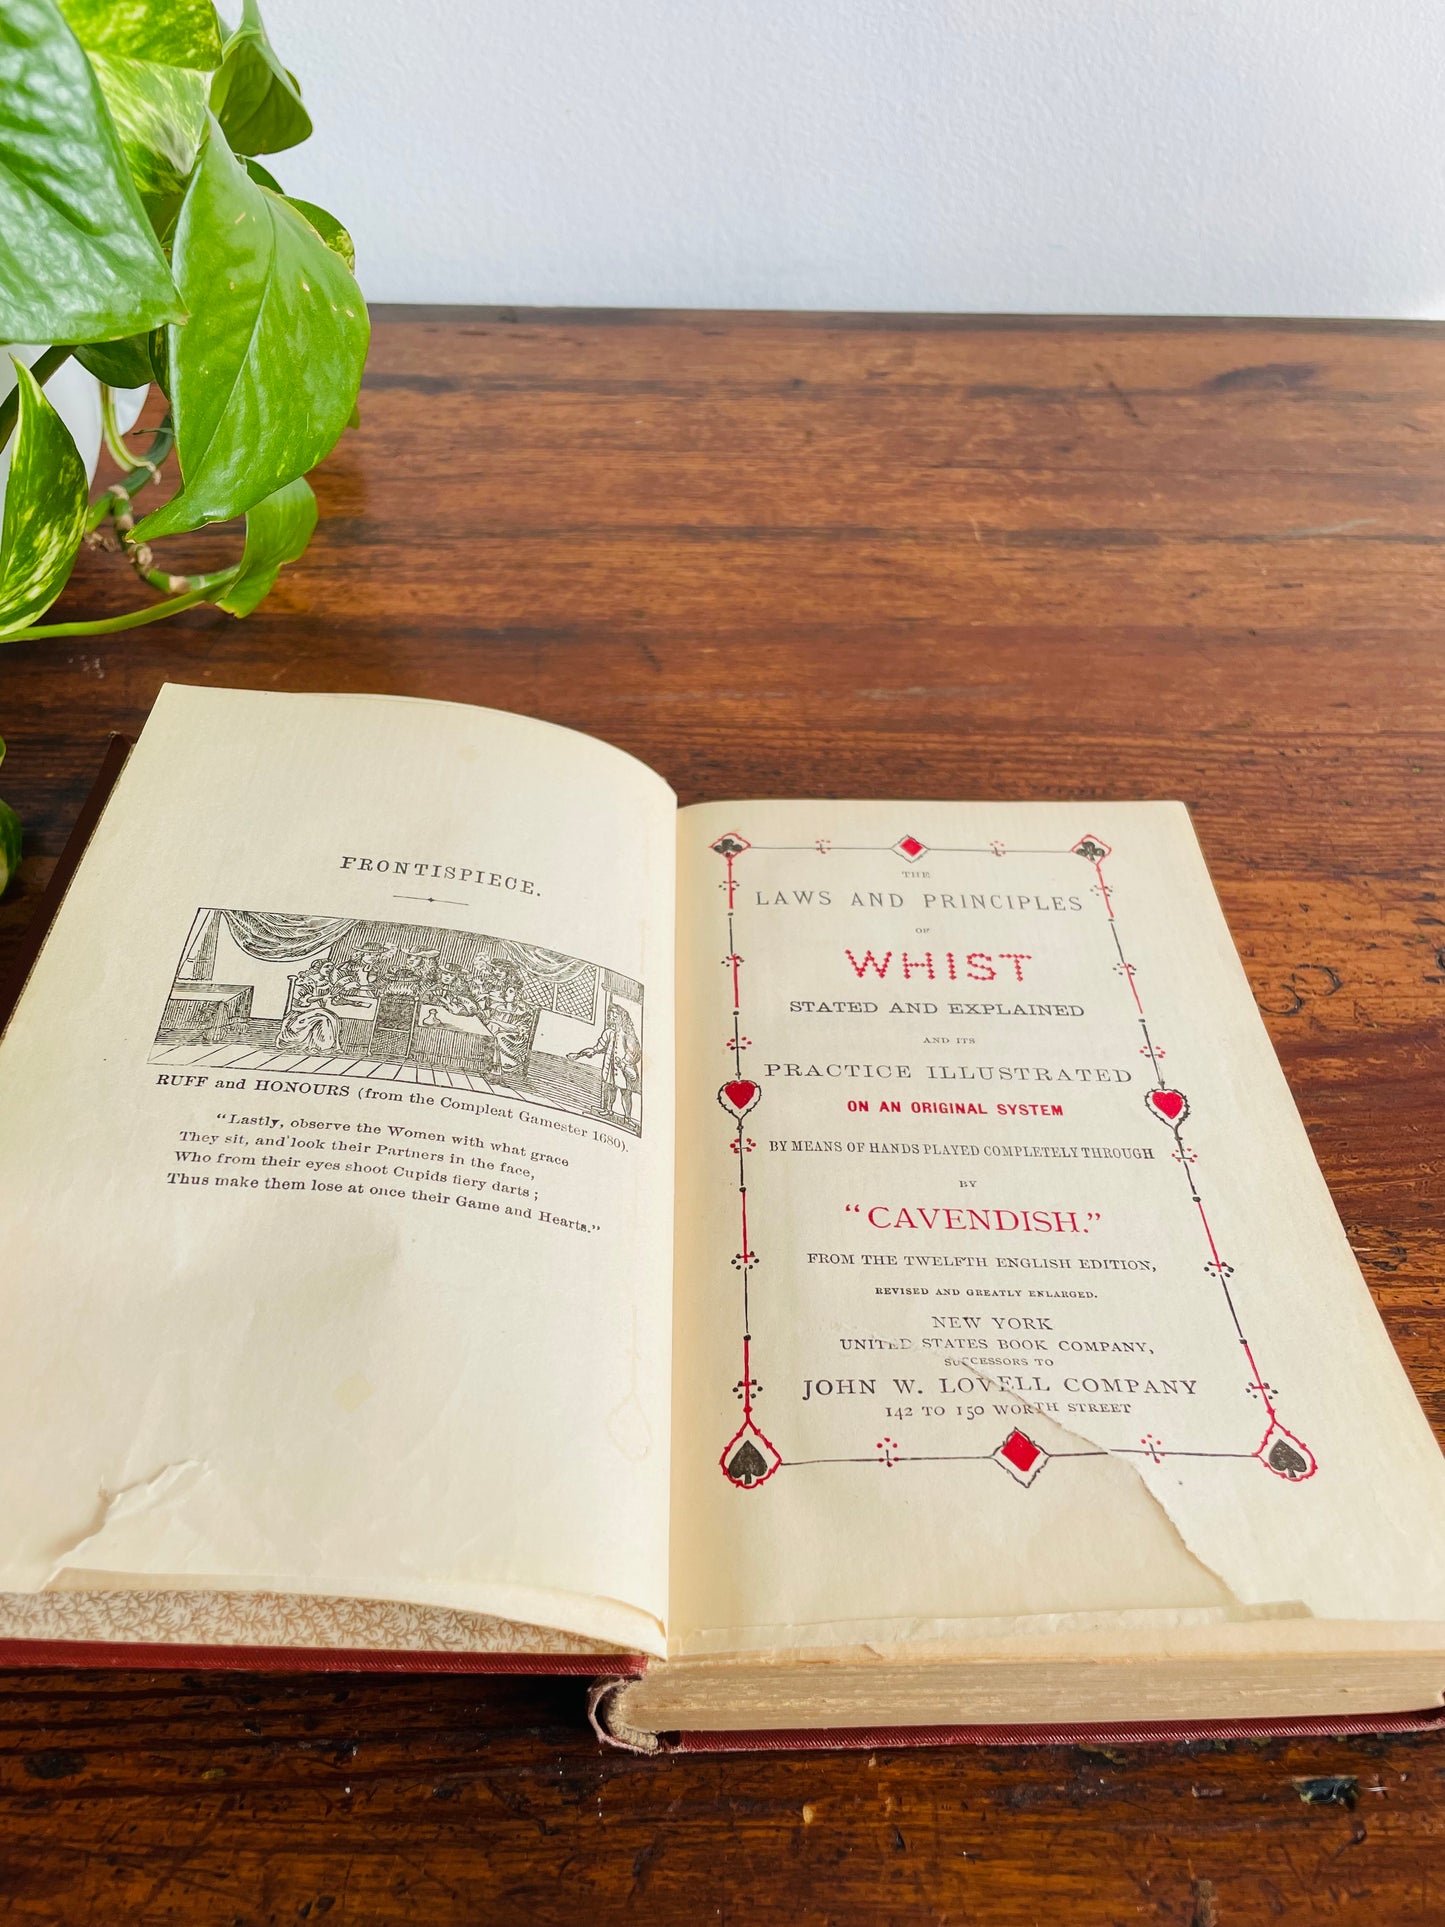 Antique Cavendish on Whist Hardcover Book - The Laws & Principles of Whist Stated, Explained & Illustrated (1870s) Twelfth Edition